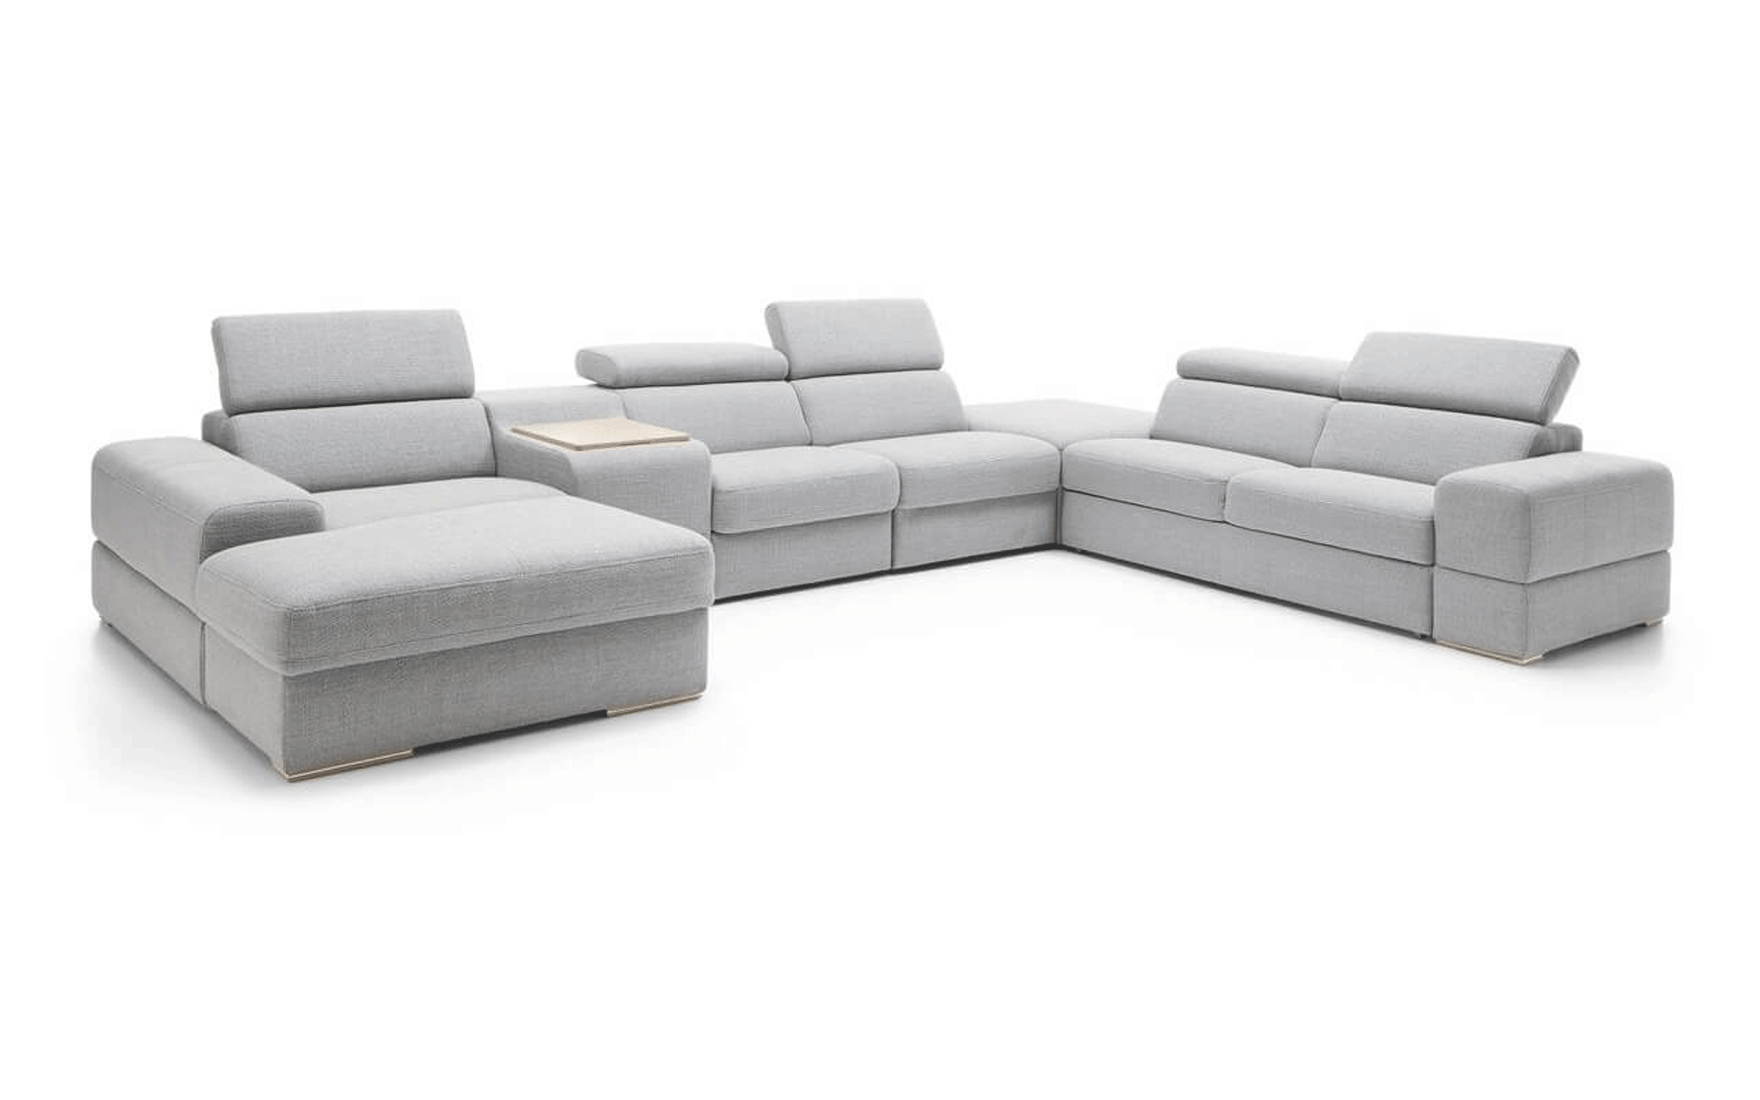 sent Afford Mus Plaza Sectional w/Bed, Recliner Chair, Bar & Storage, Galla Leather  Collection, Europe, Brands